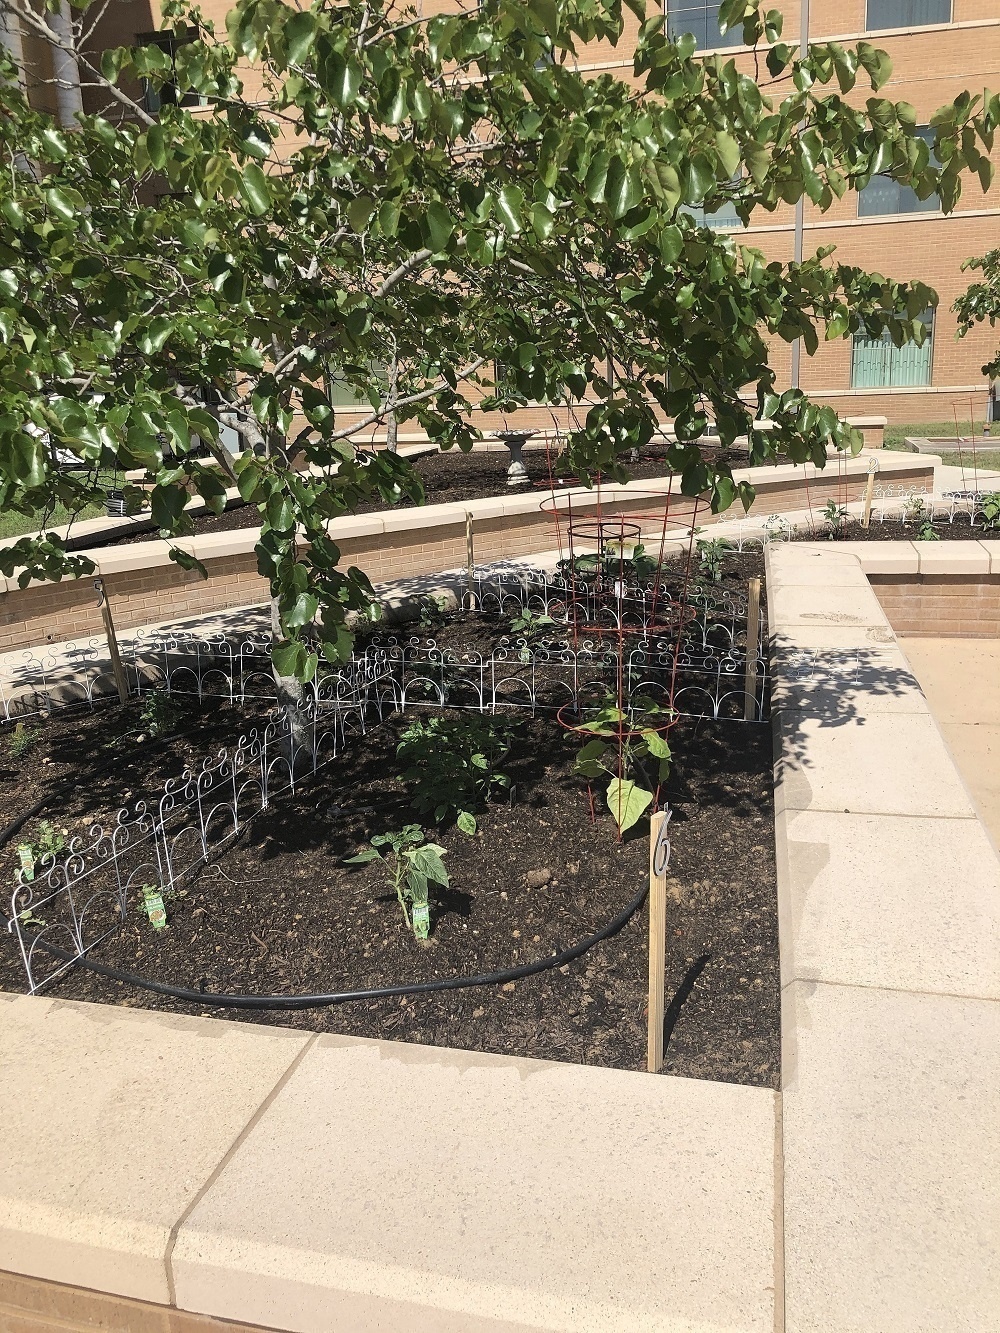 ARCP Soldiers get green thumbs